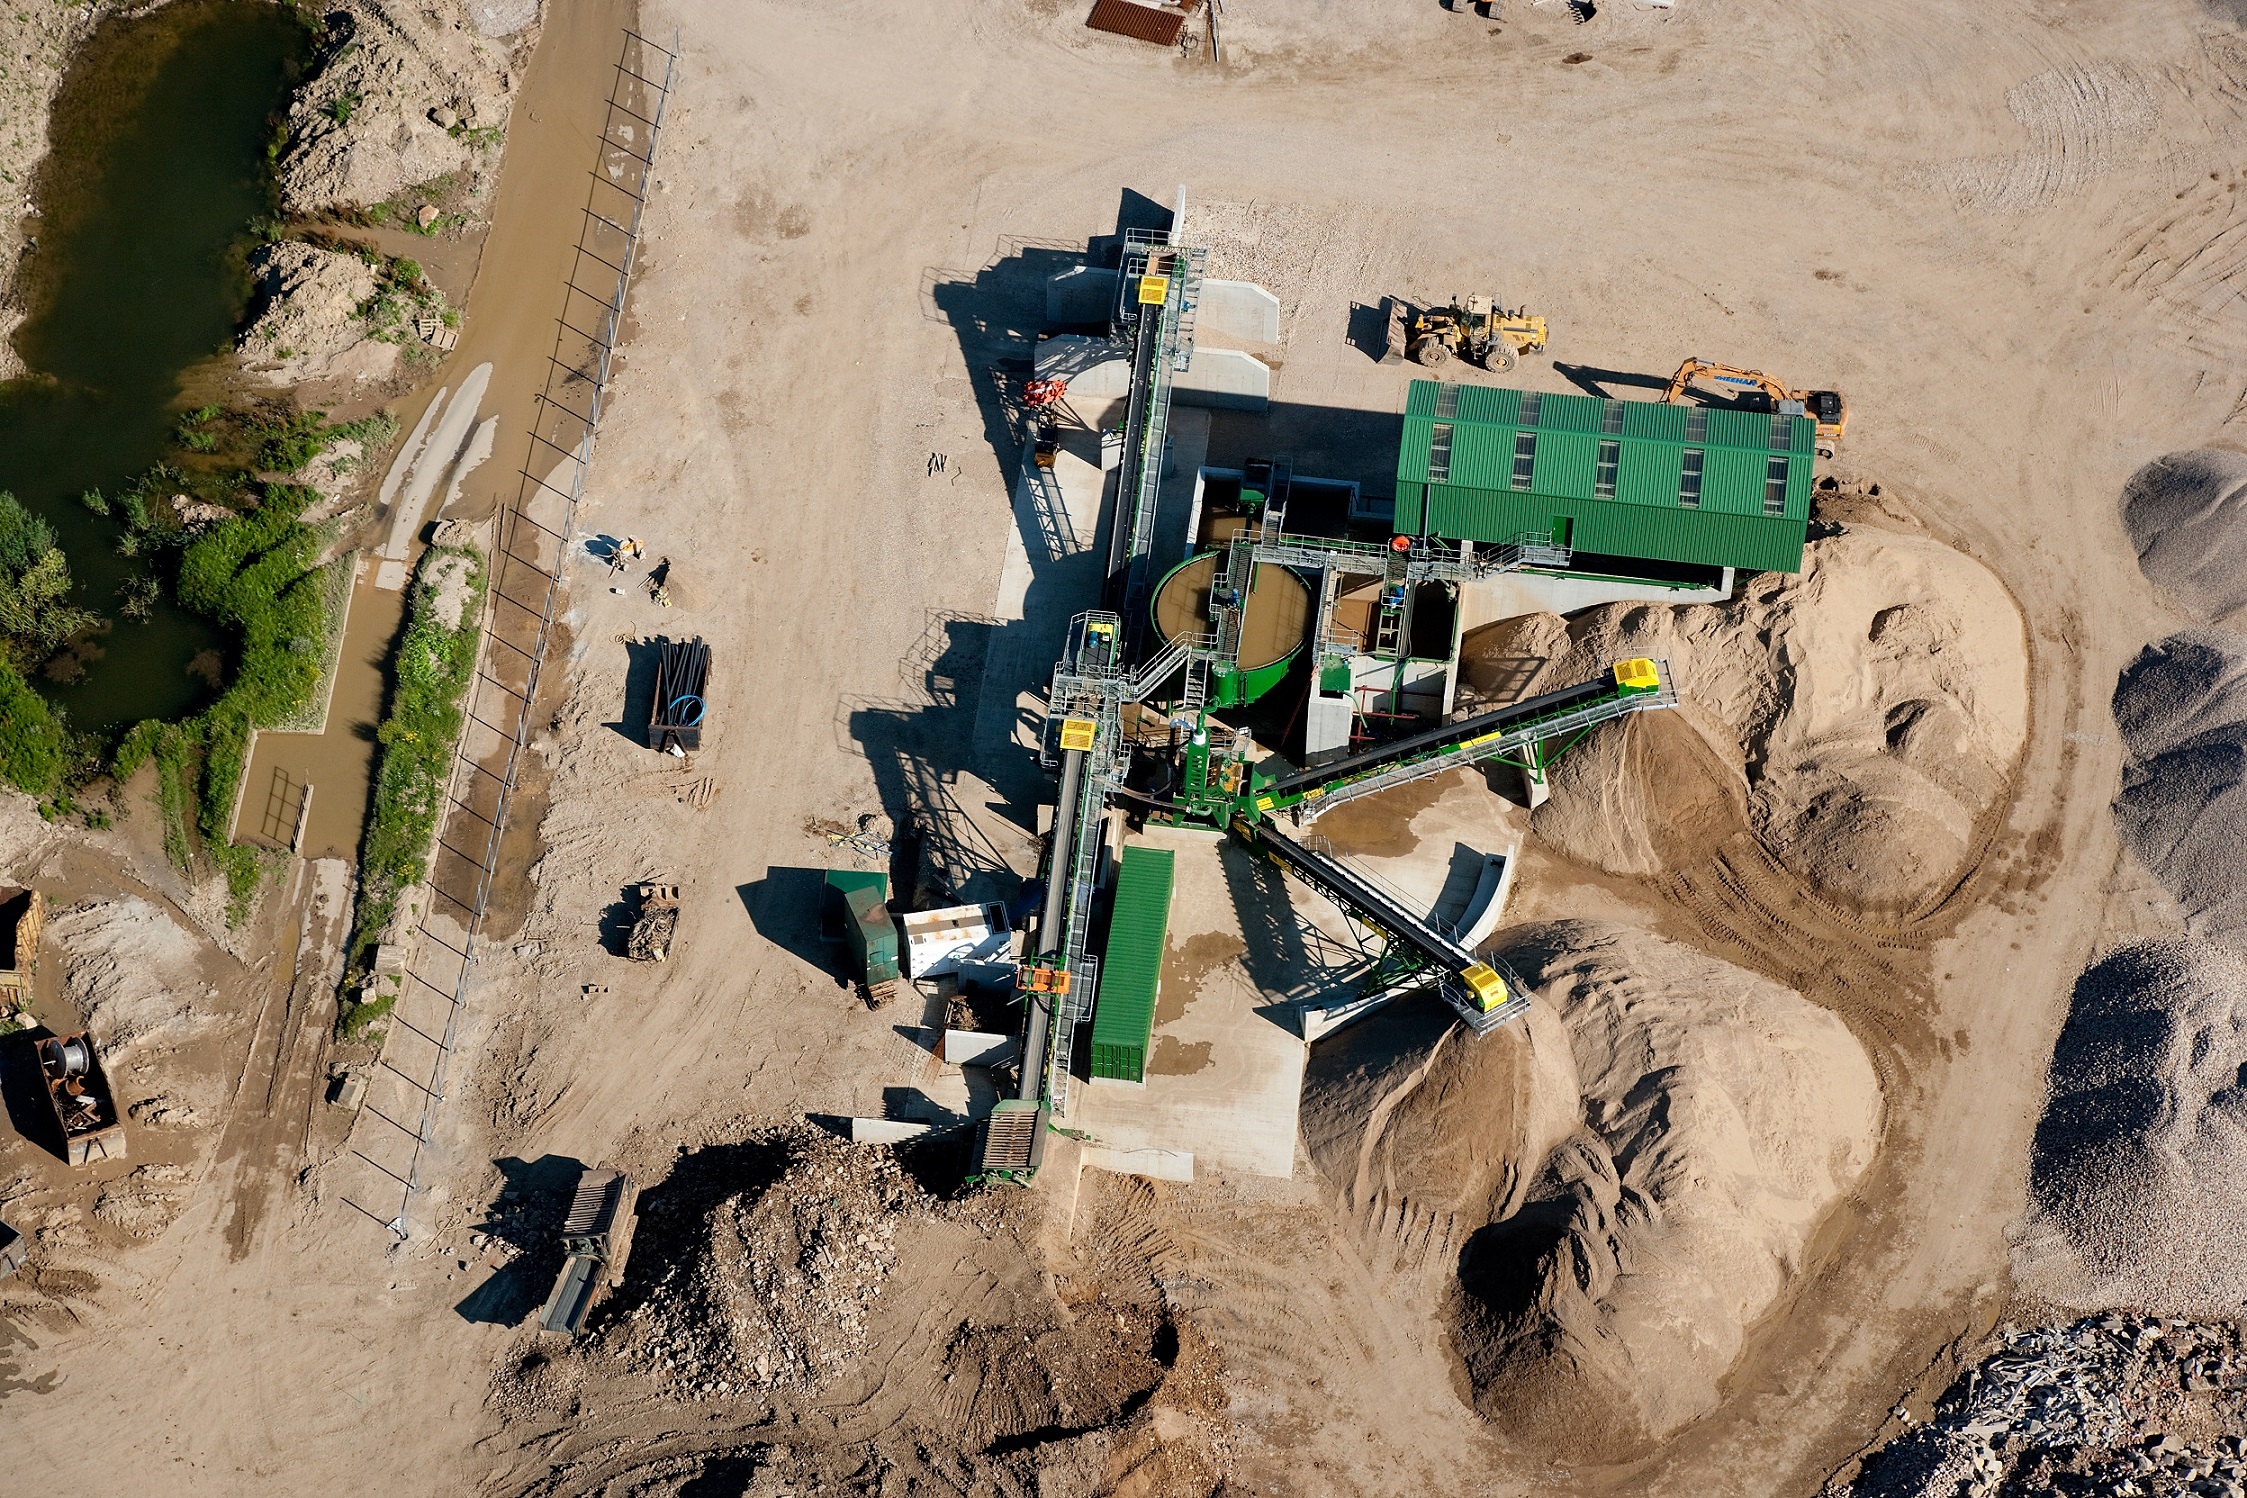 Sheehan Group produces concrete building blocks from 100% recycled sand and aggregate